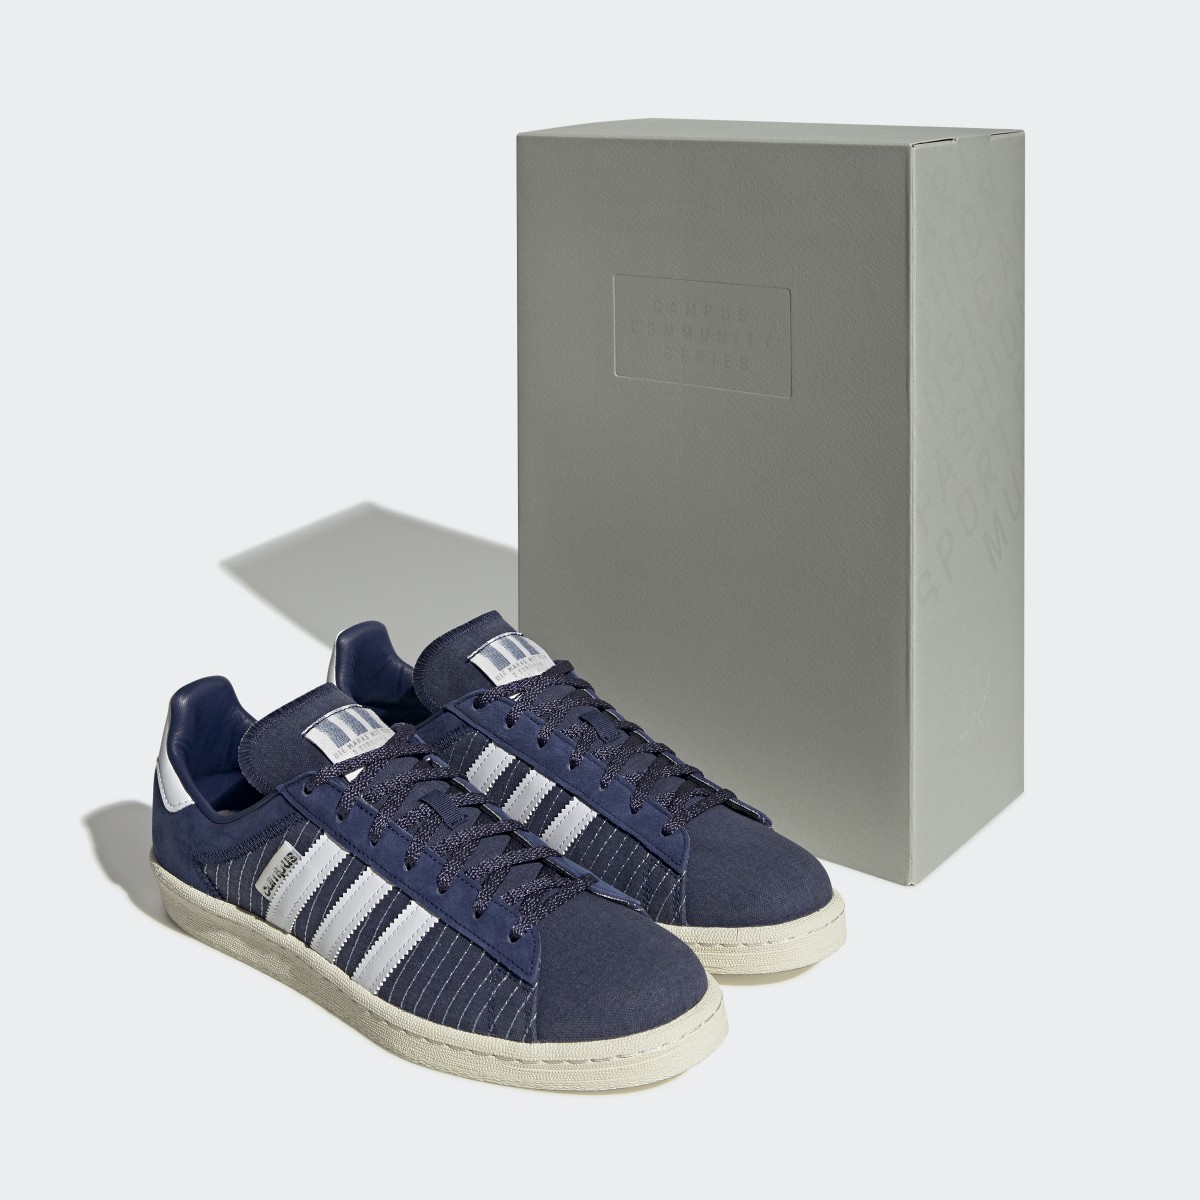 Adidas Campus 80s Shoes. 4